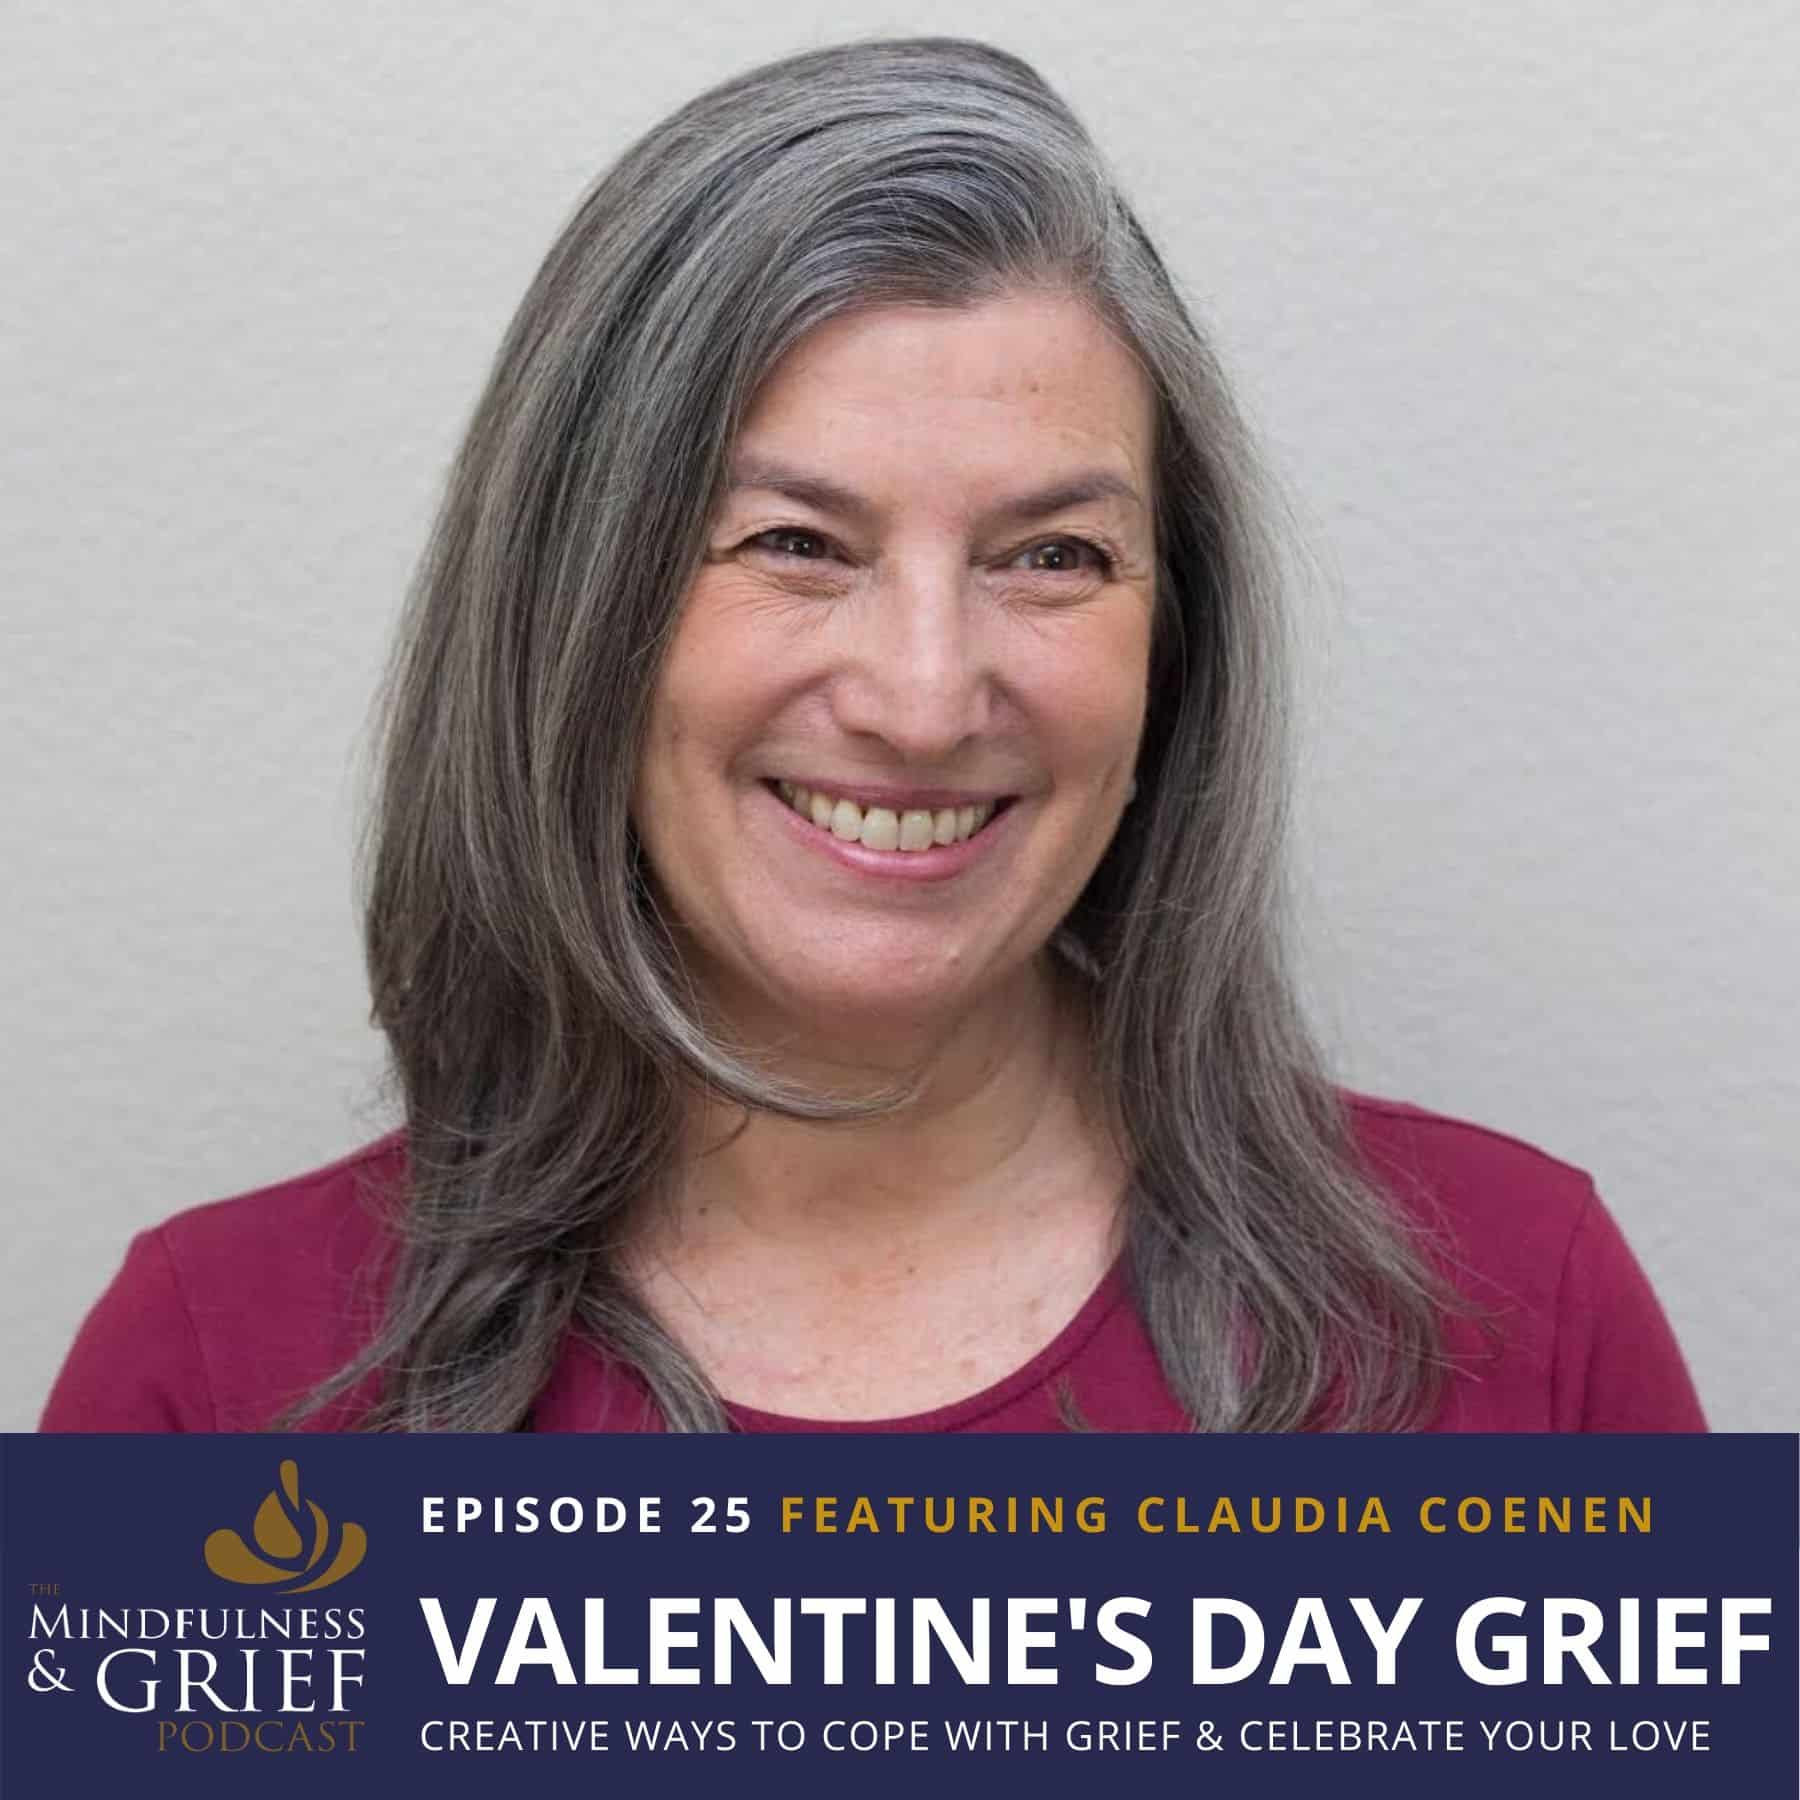 valentines day grief mindfulness grief podcast 25 claudia coenen